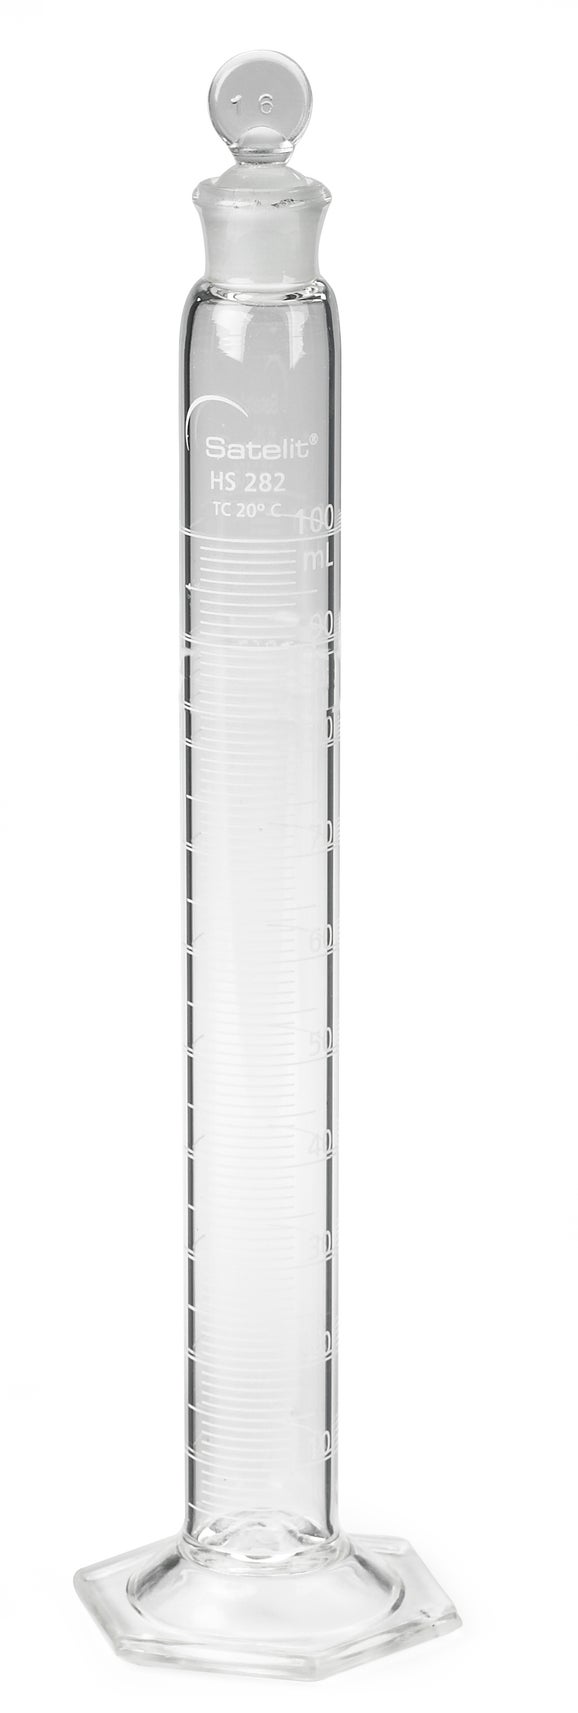 Cylinder, graduated, mixing, Glass, 100 mL +-0.6 mL, 1.0 mL divisions, glass stopper #16